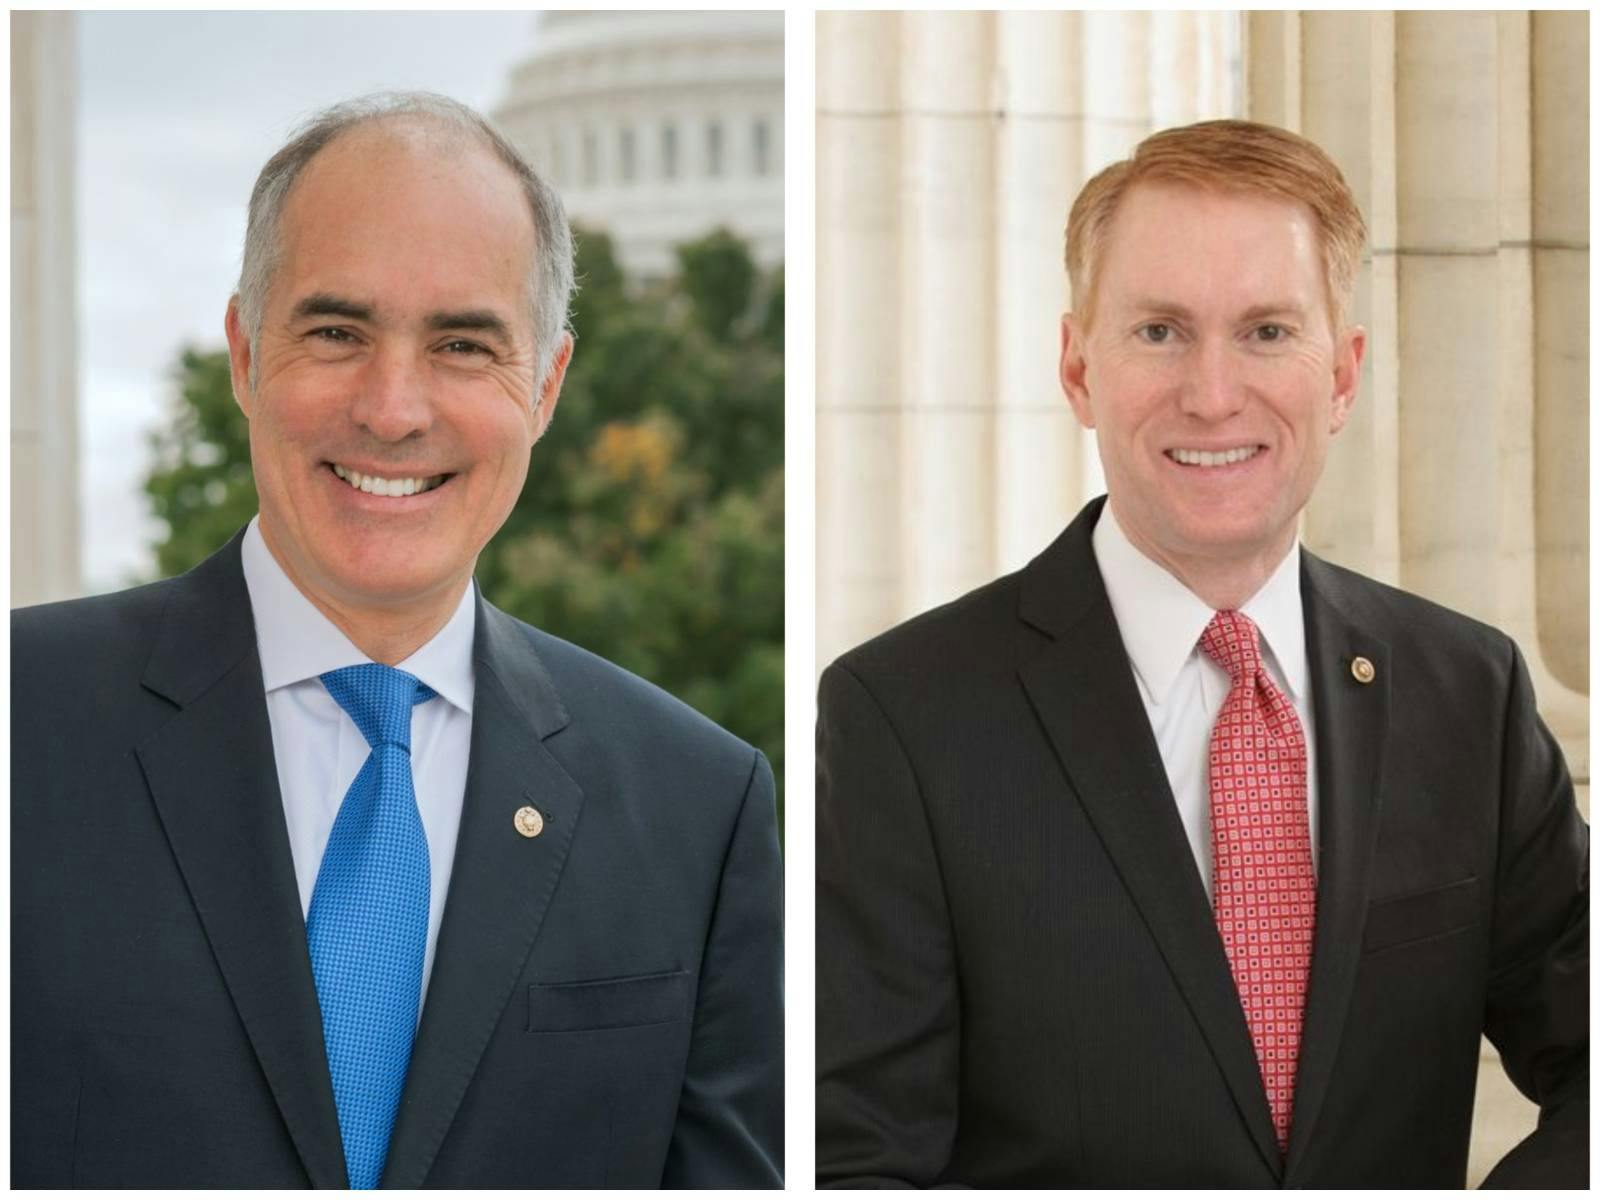 U.S. Sen. Bob Casey, D-Pa., left, and U.S. Sen. James Lankford, R-Okla., led a bipartisan group of lawmakers in an appeal to Senate leaders to prevent billions in cuts to a Medicaid program for hospitals. (Photos: U.S. Senate offices)